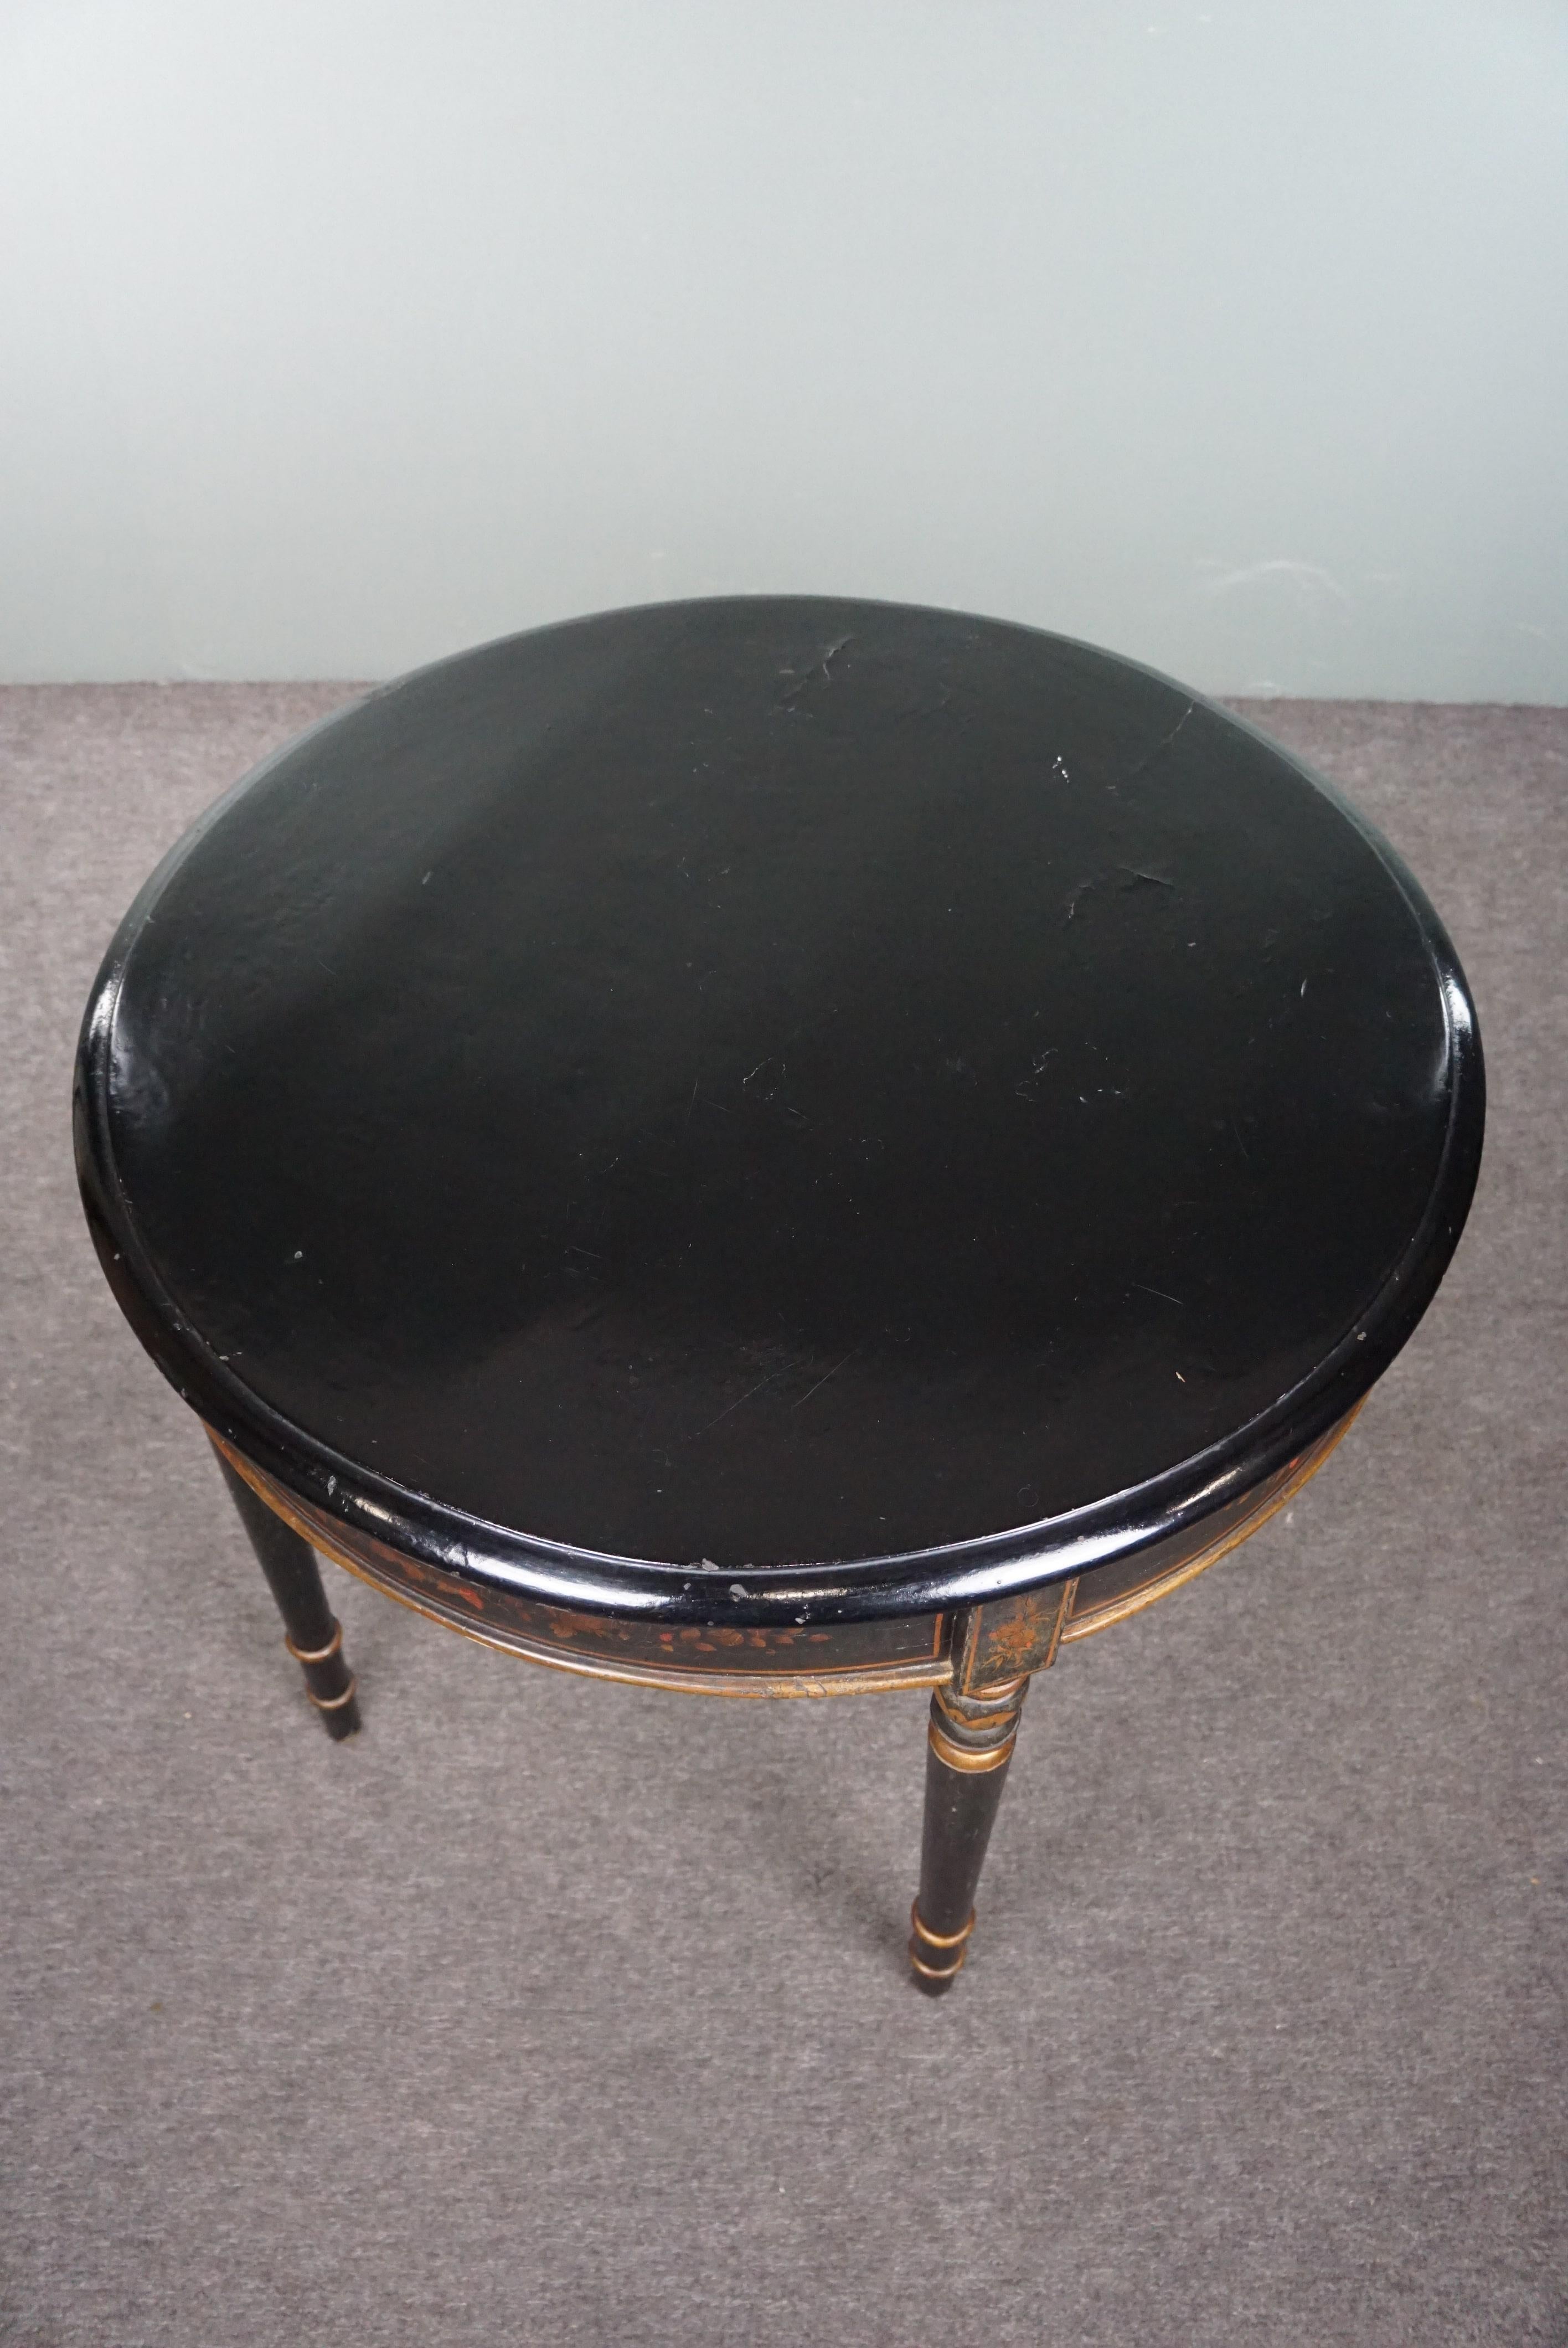 Offered is this exquisite antique center table with hand-painted Japanese/Eastern influences and motifs. Every now and then, an item comes along that touches you just a bit more than others. That's the feeling we have with this side table. With its